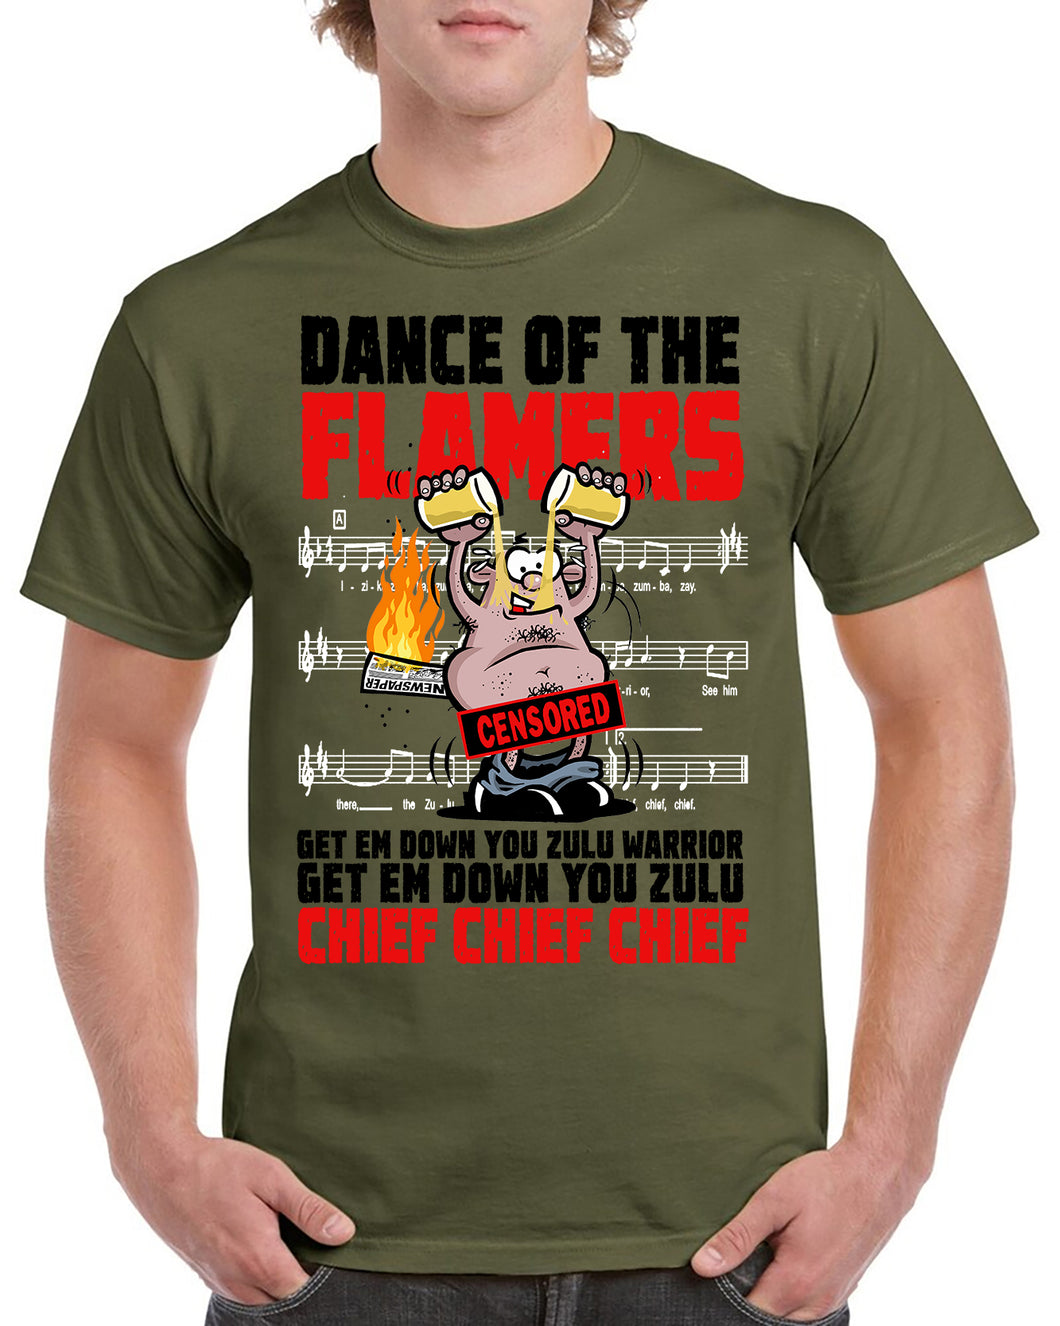 Military Humor - Dance of the Flaming.... You know the rest.....